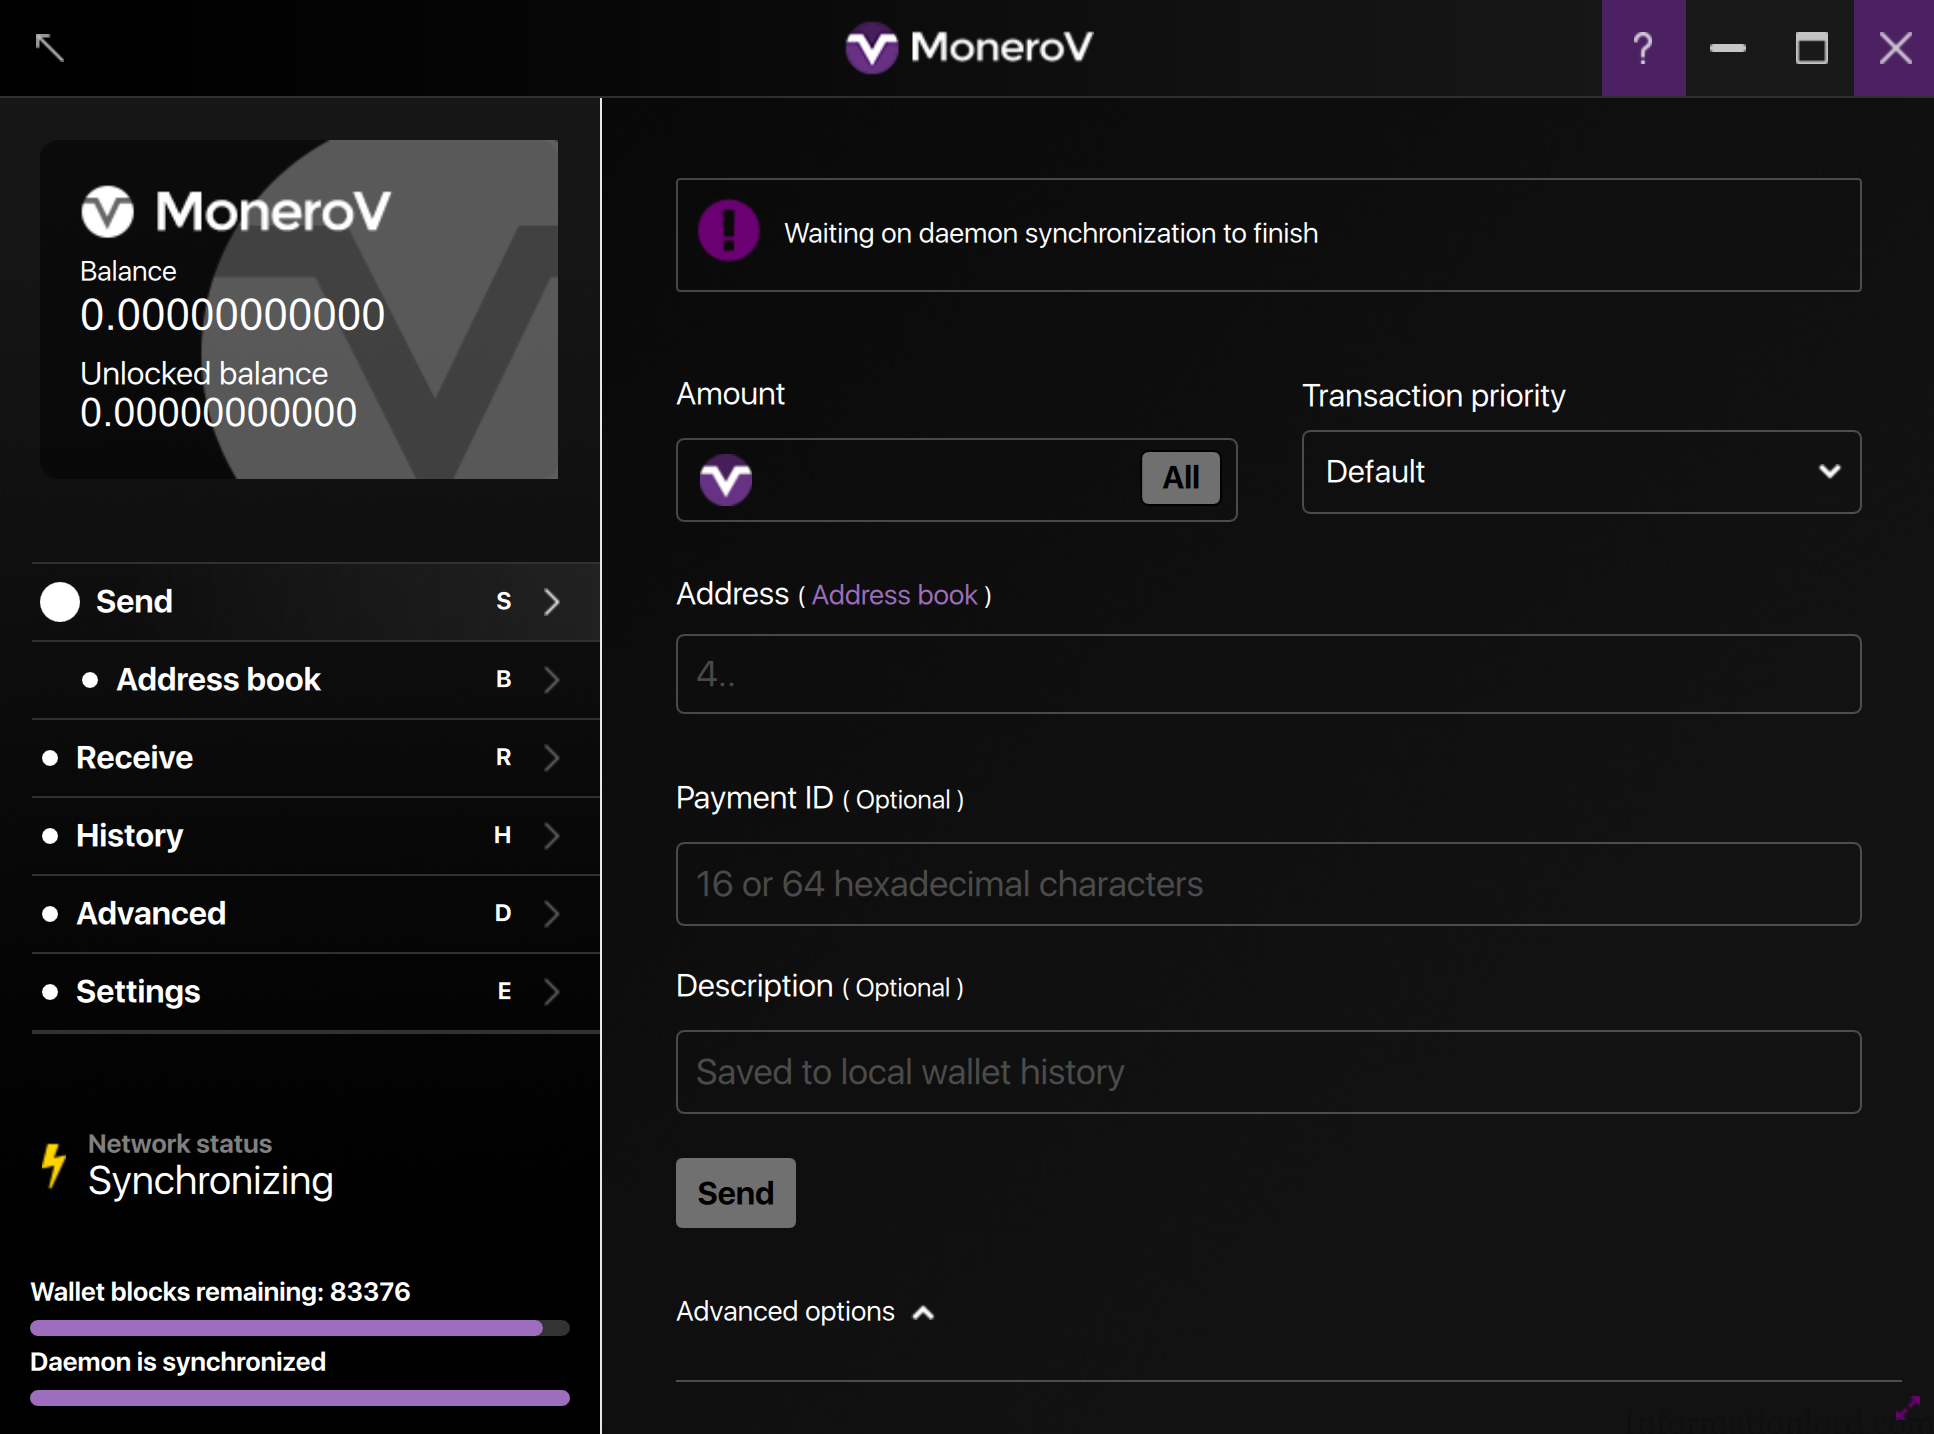 Step by step guide to get monerov xmrv from monero